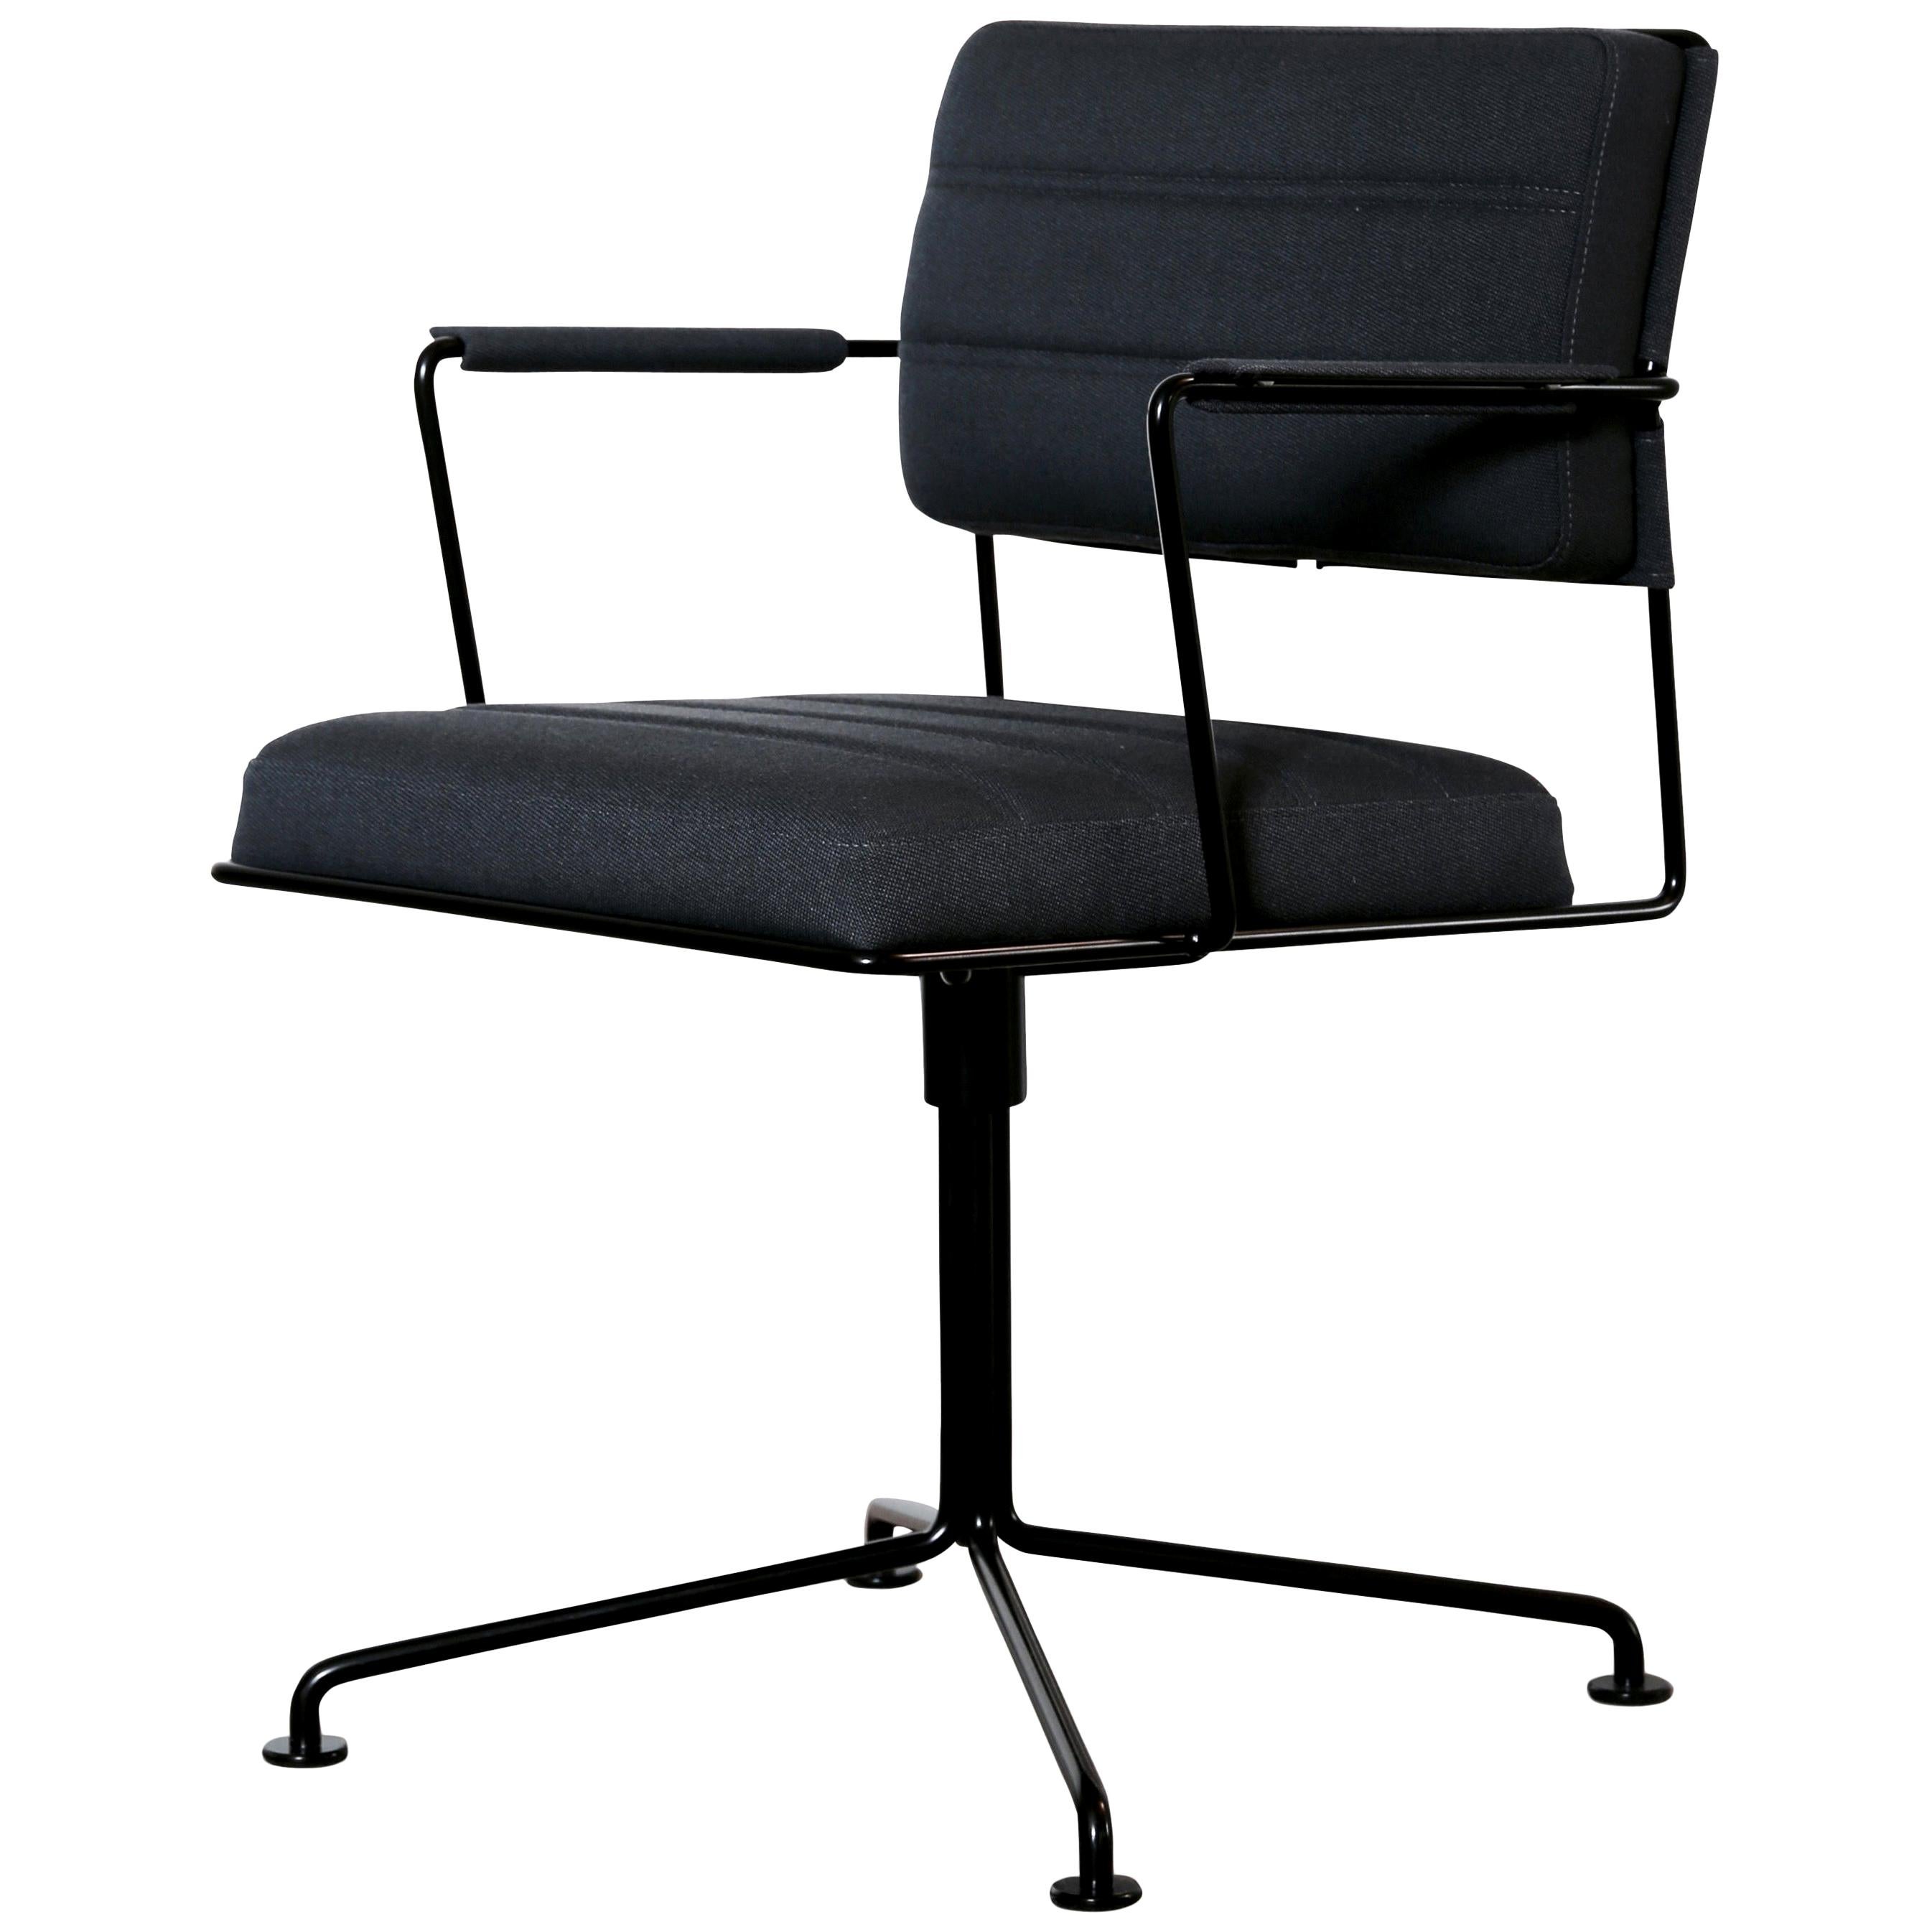 Henrik Tengler, HT 2012 Black Upholstery Time Chair by One Collection For Sale